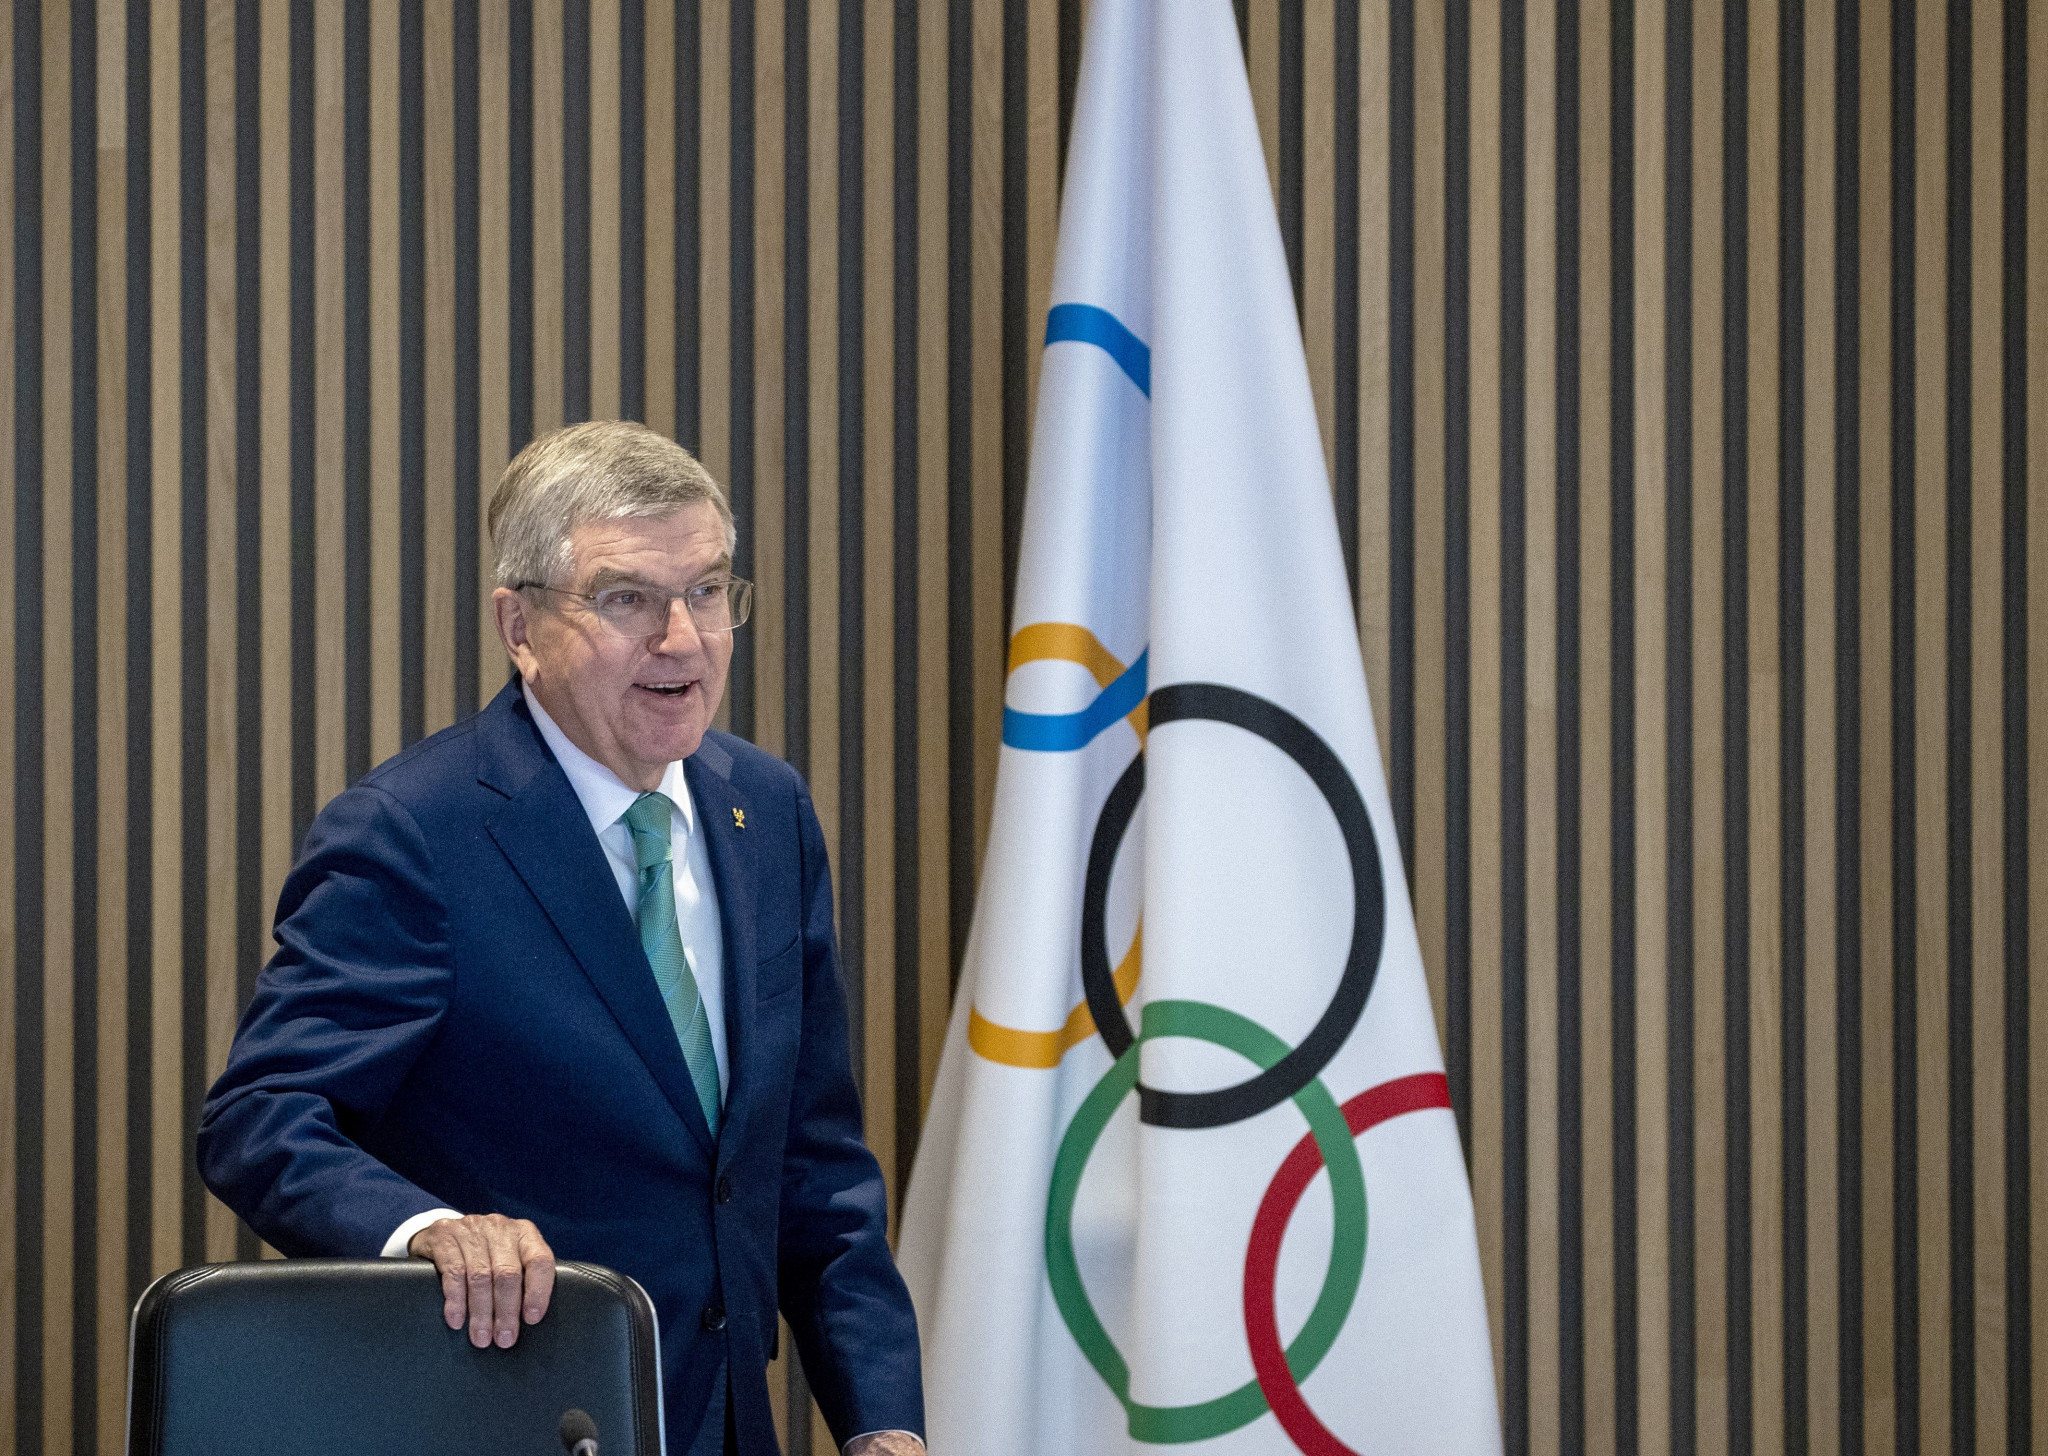 IOC President Thomas Bach contracted COVID-19 recently, but was able to attend the Executive Board meeting and deliver a welcome and his report ©Getty Images